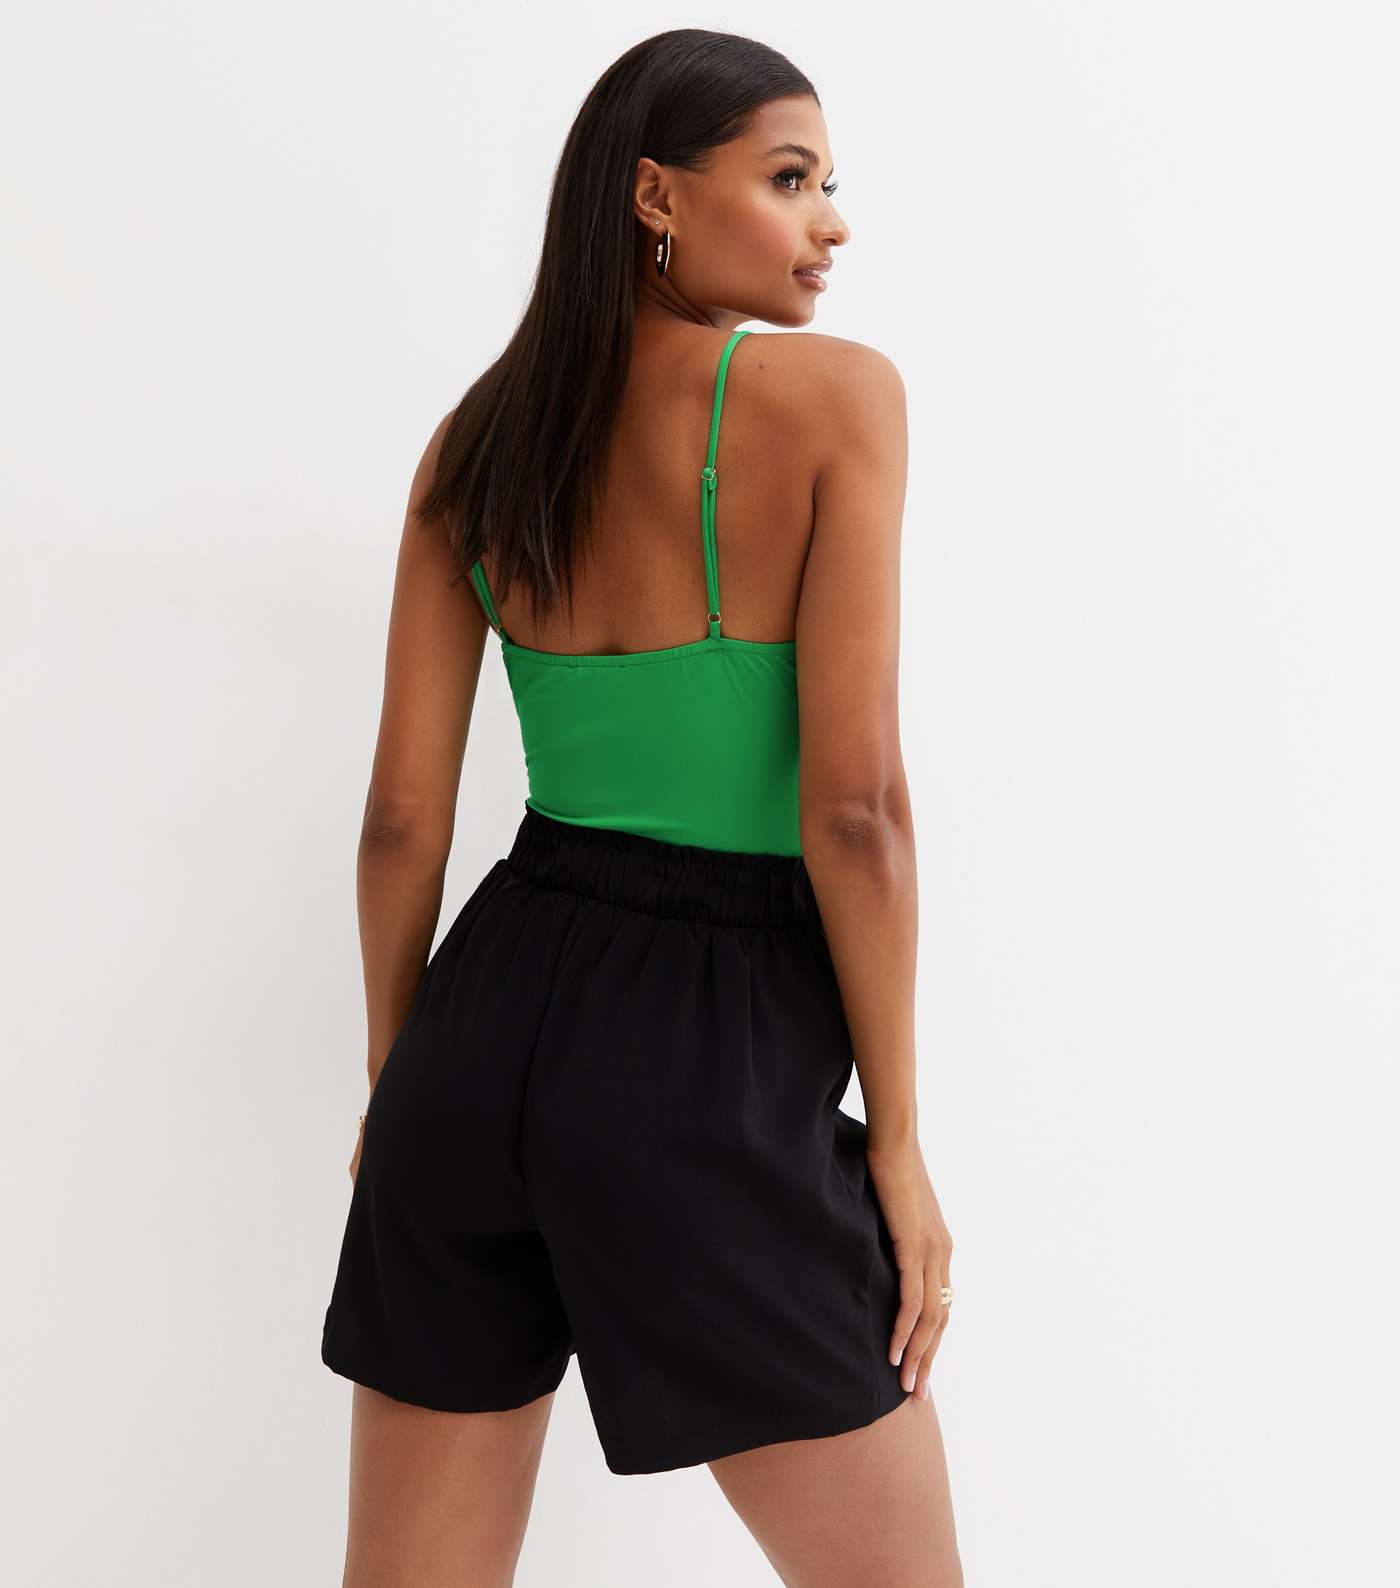 Cameo Rose Green Twist Front Strappy Bodysuit Image 4